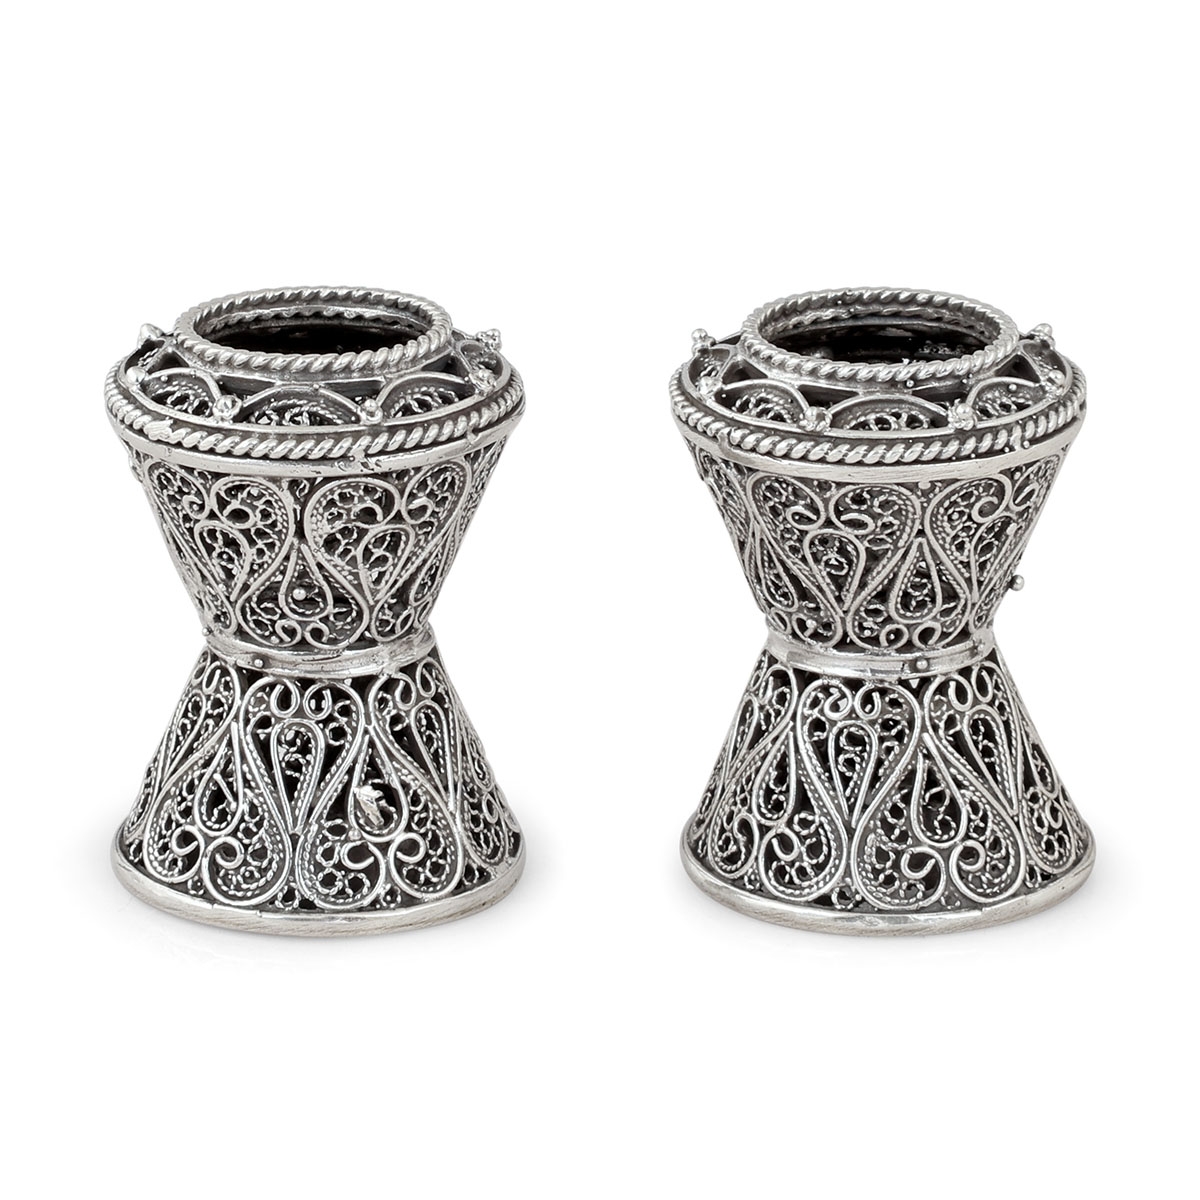 Traditional Yemenite Art Chic Handcrafted Sterling Silver Candlesticks With Filigree Design - 1